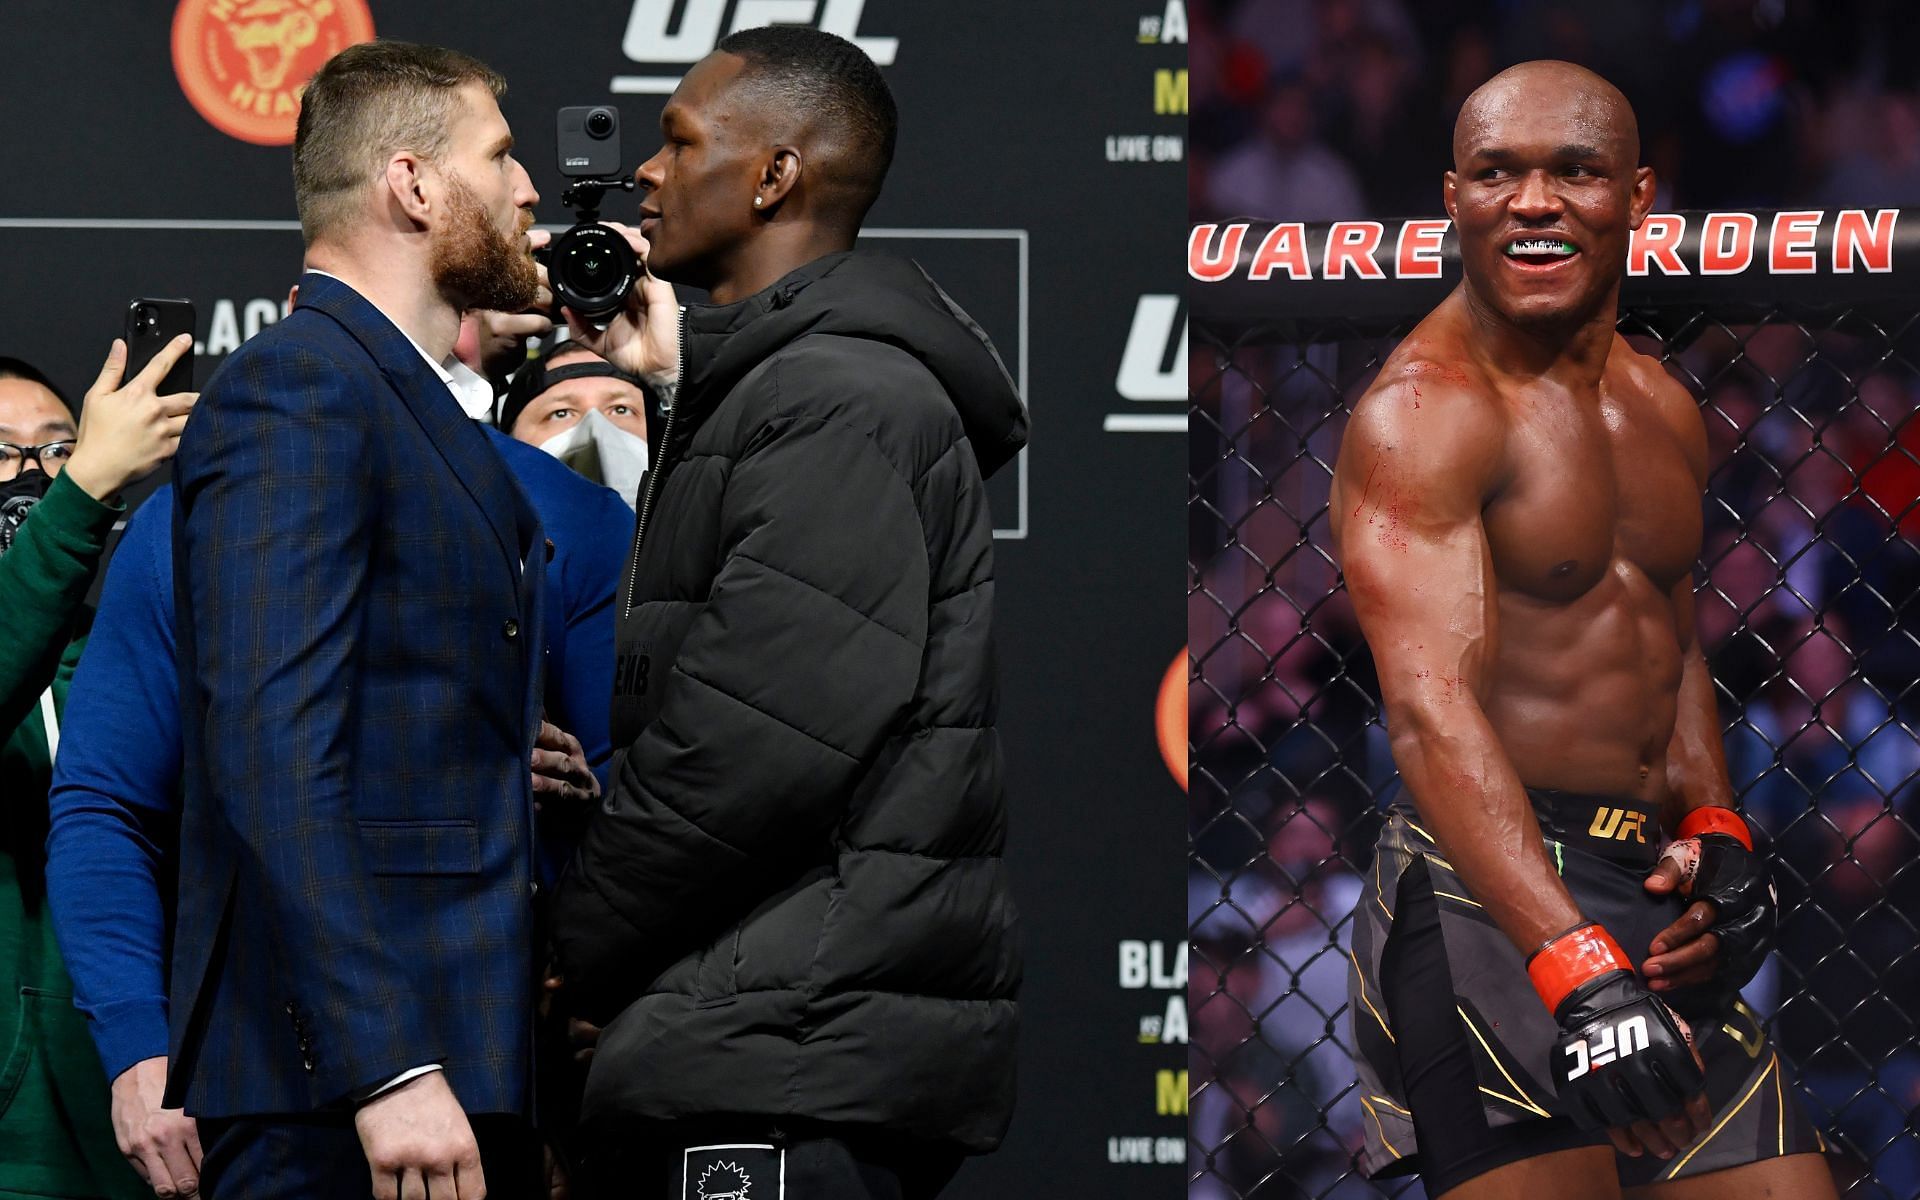 Jan Blachowicz and Israel Adesanya face off ahead of their UFC 259 bout (left) and Kamaru Usman enters the octagon at UFC 268 (right)